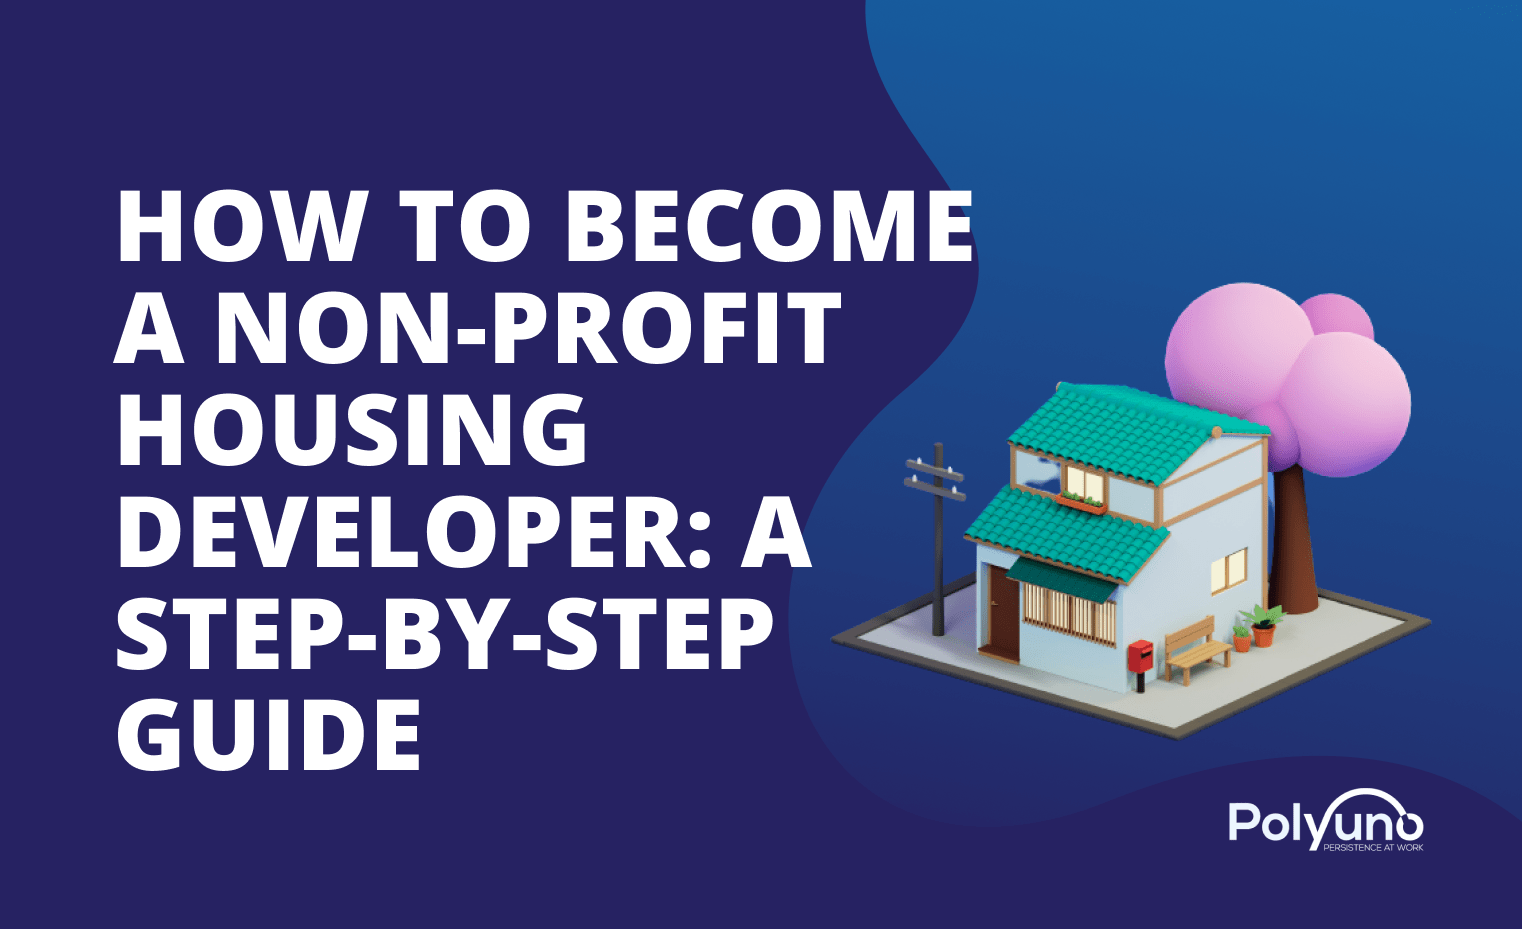 How to Become a Non-Profit Housing Developer